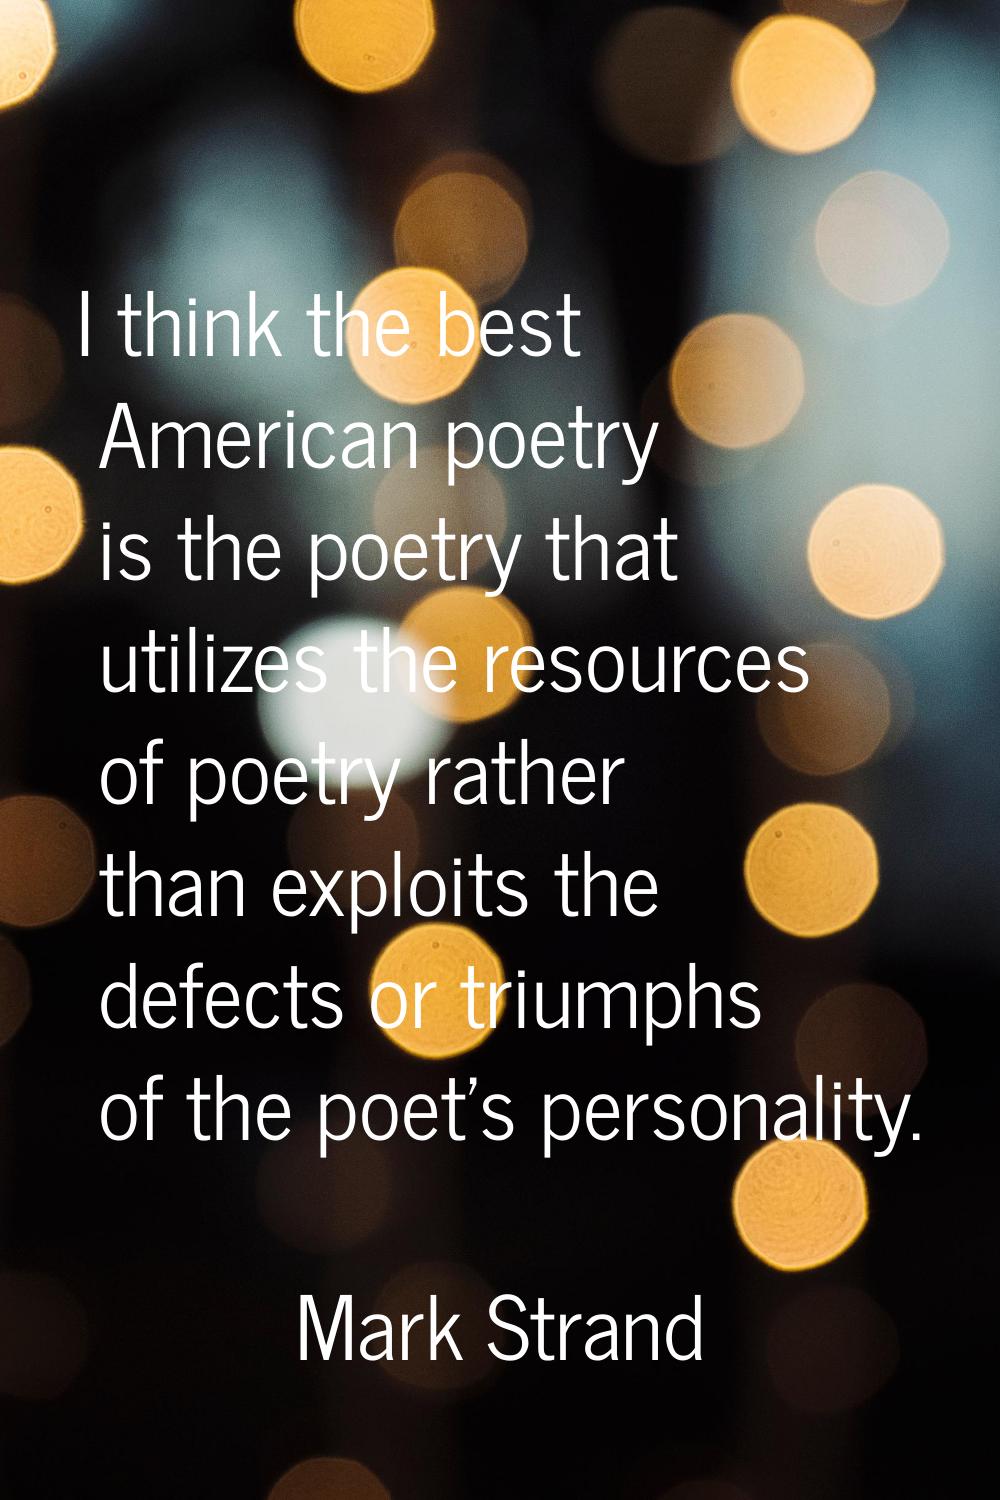 I think the best American poetry is the poetry that utilizes the resources of poetry rather than ex